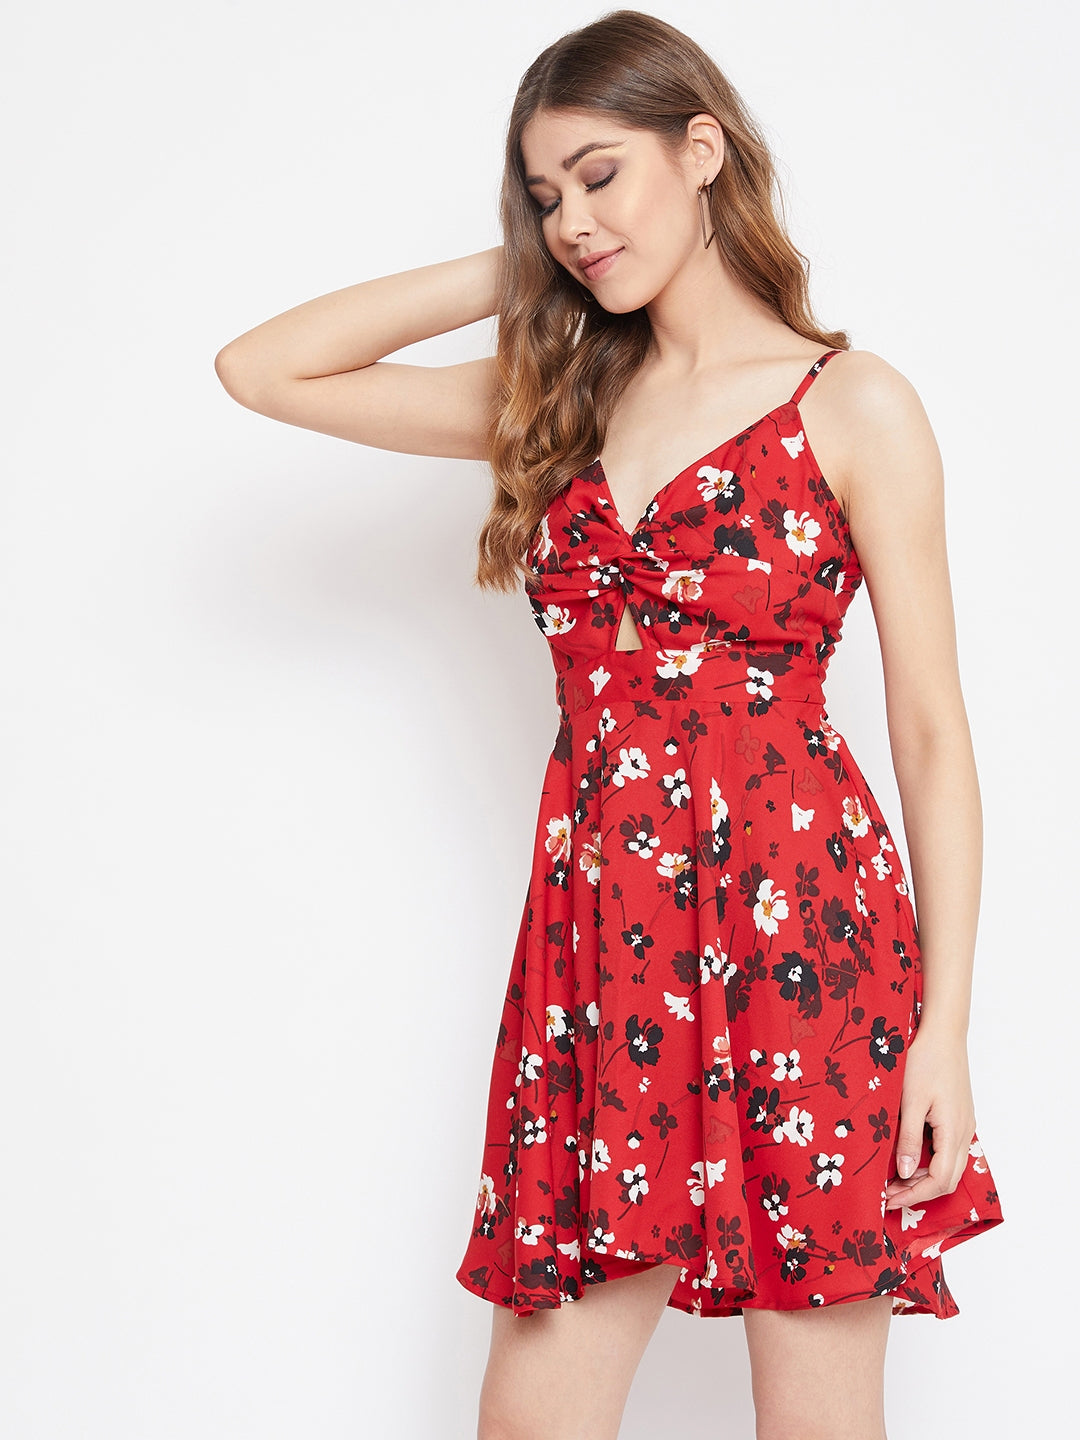 Berrylush Women Red Floral Printed V-Neck Front Twist Knot Fit & Flare Mini Dress